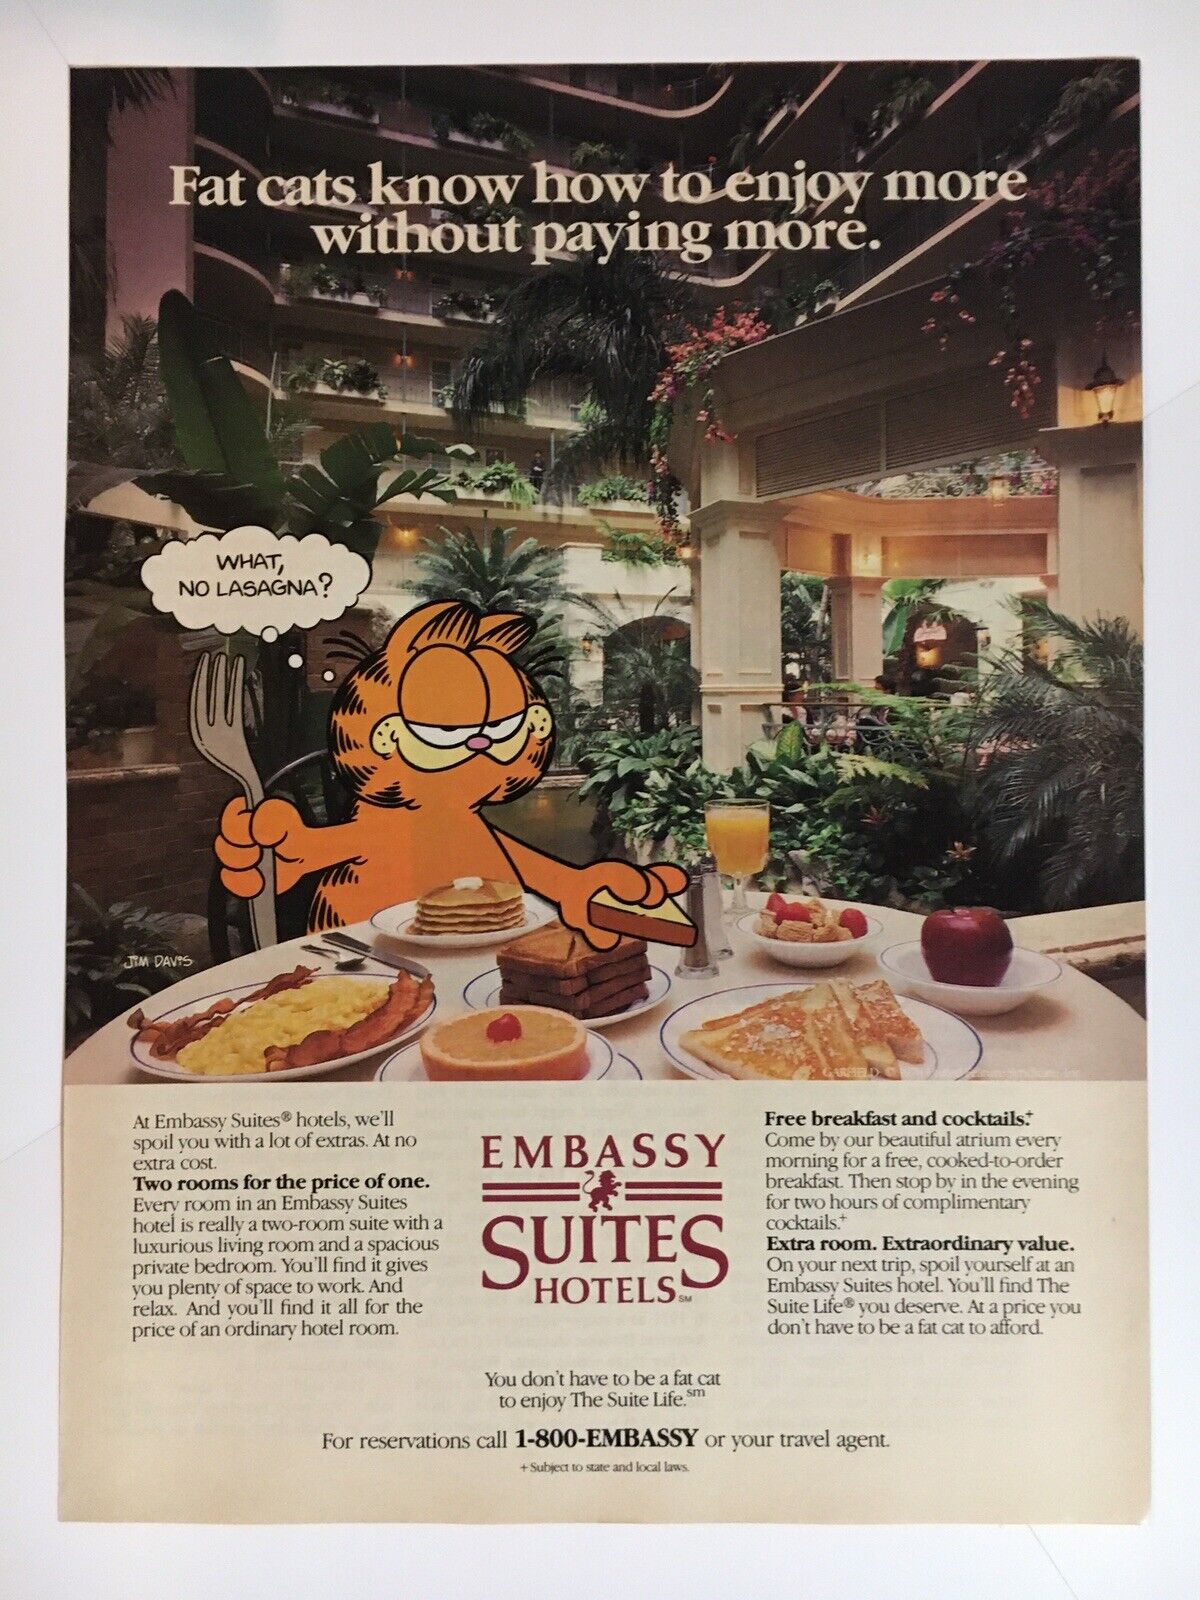 Garfield Embassy Suites 1987 Vintage Print Ad 8x11 Inches Wall Decor